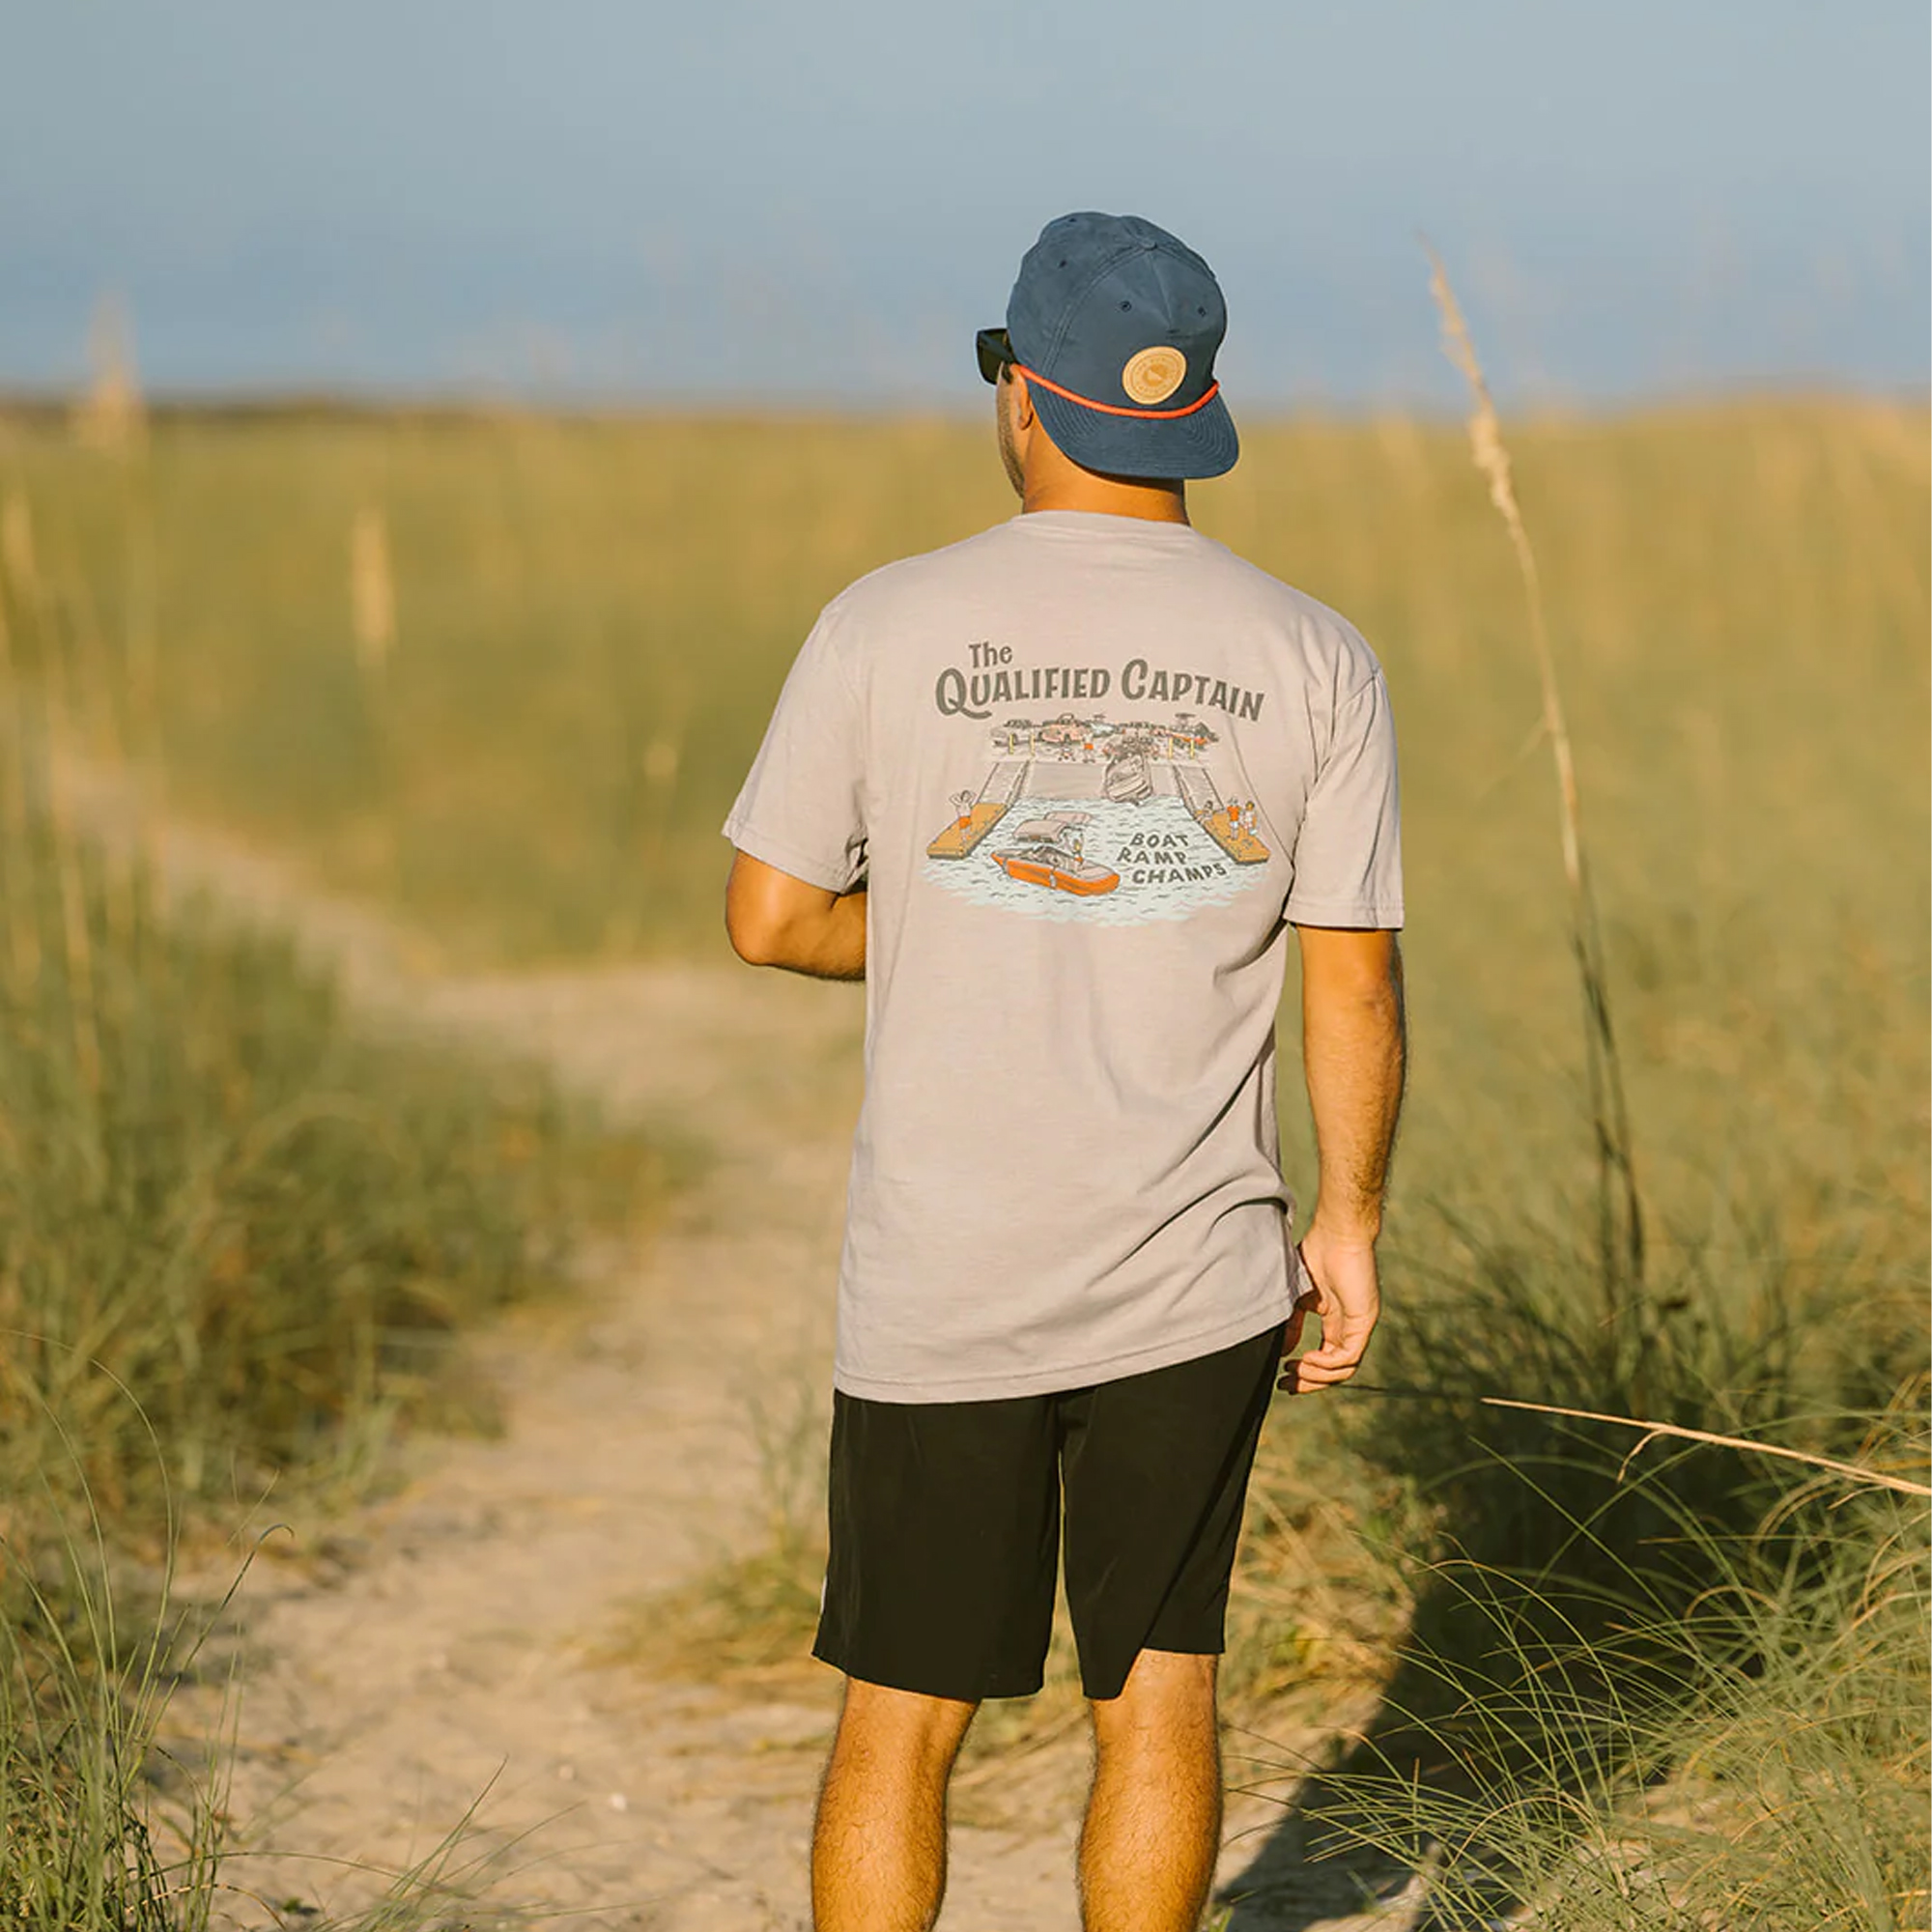 Qualified Captain Boat Ramp Champ T-Shirt - Lifestyle